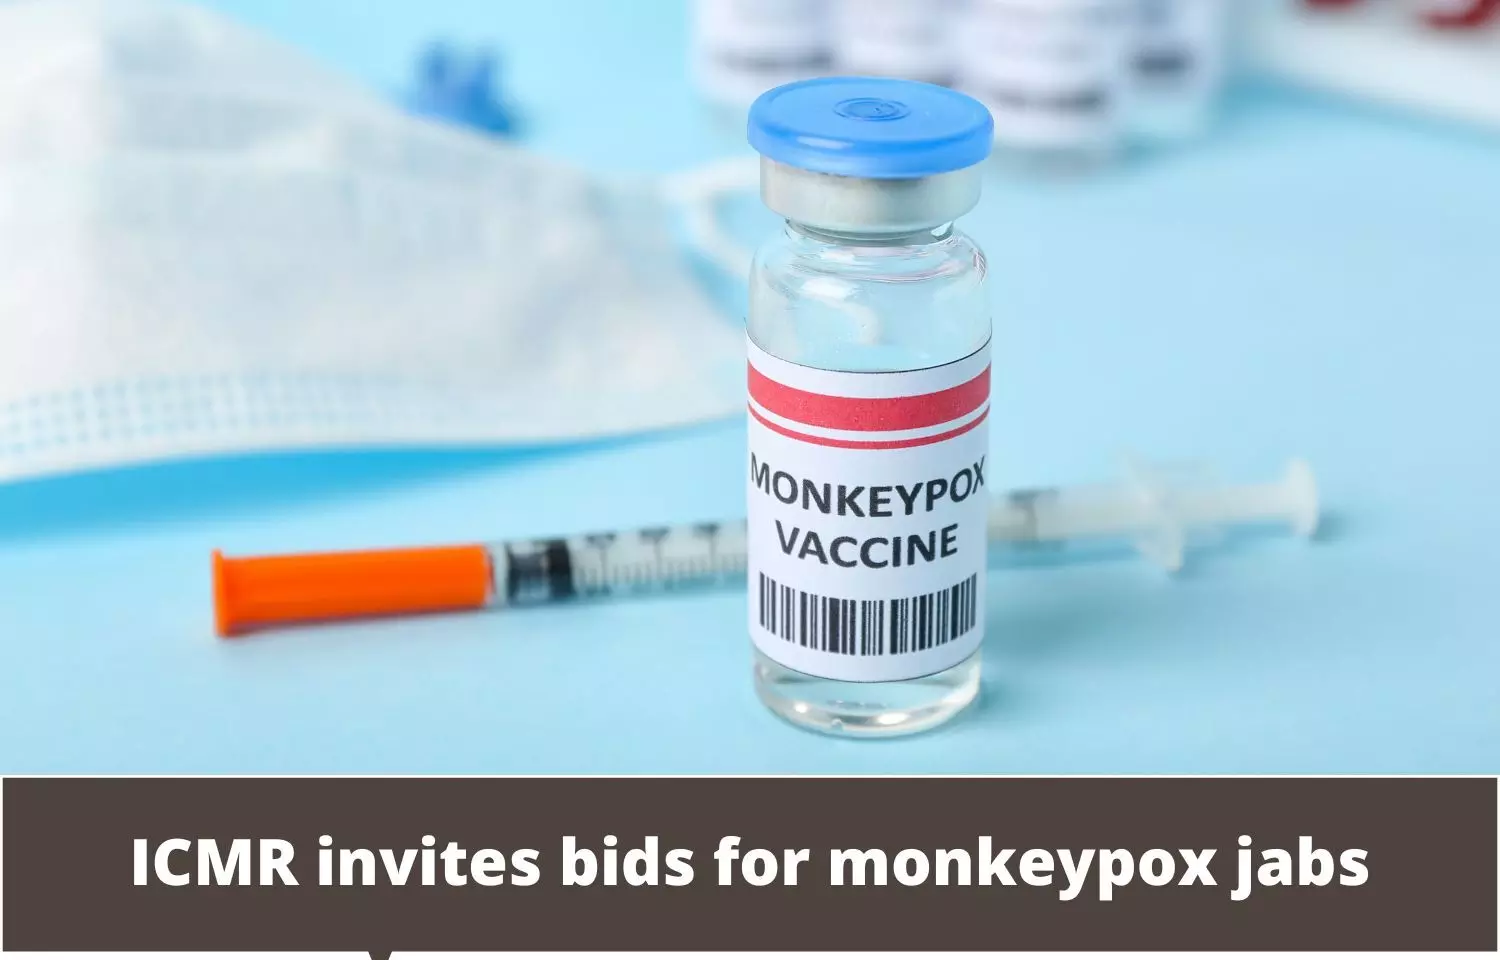 ICMR invites bids from pharma firms for development of vaccine against Monkeypox